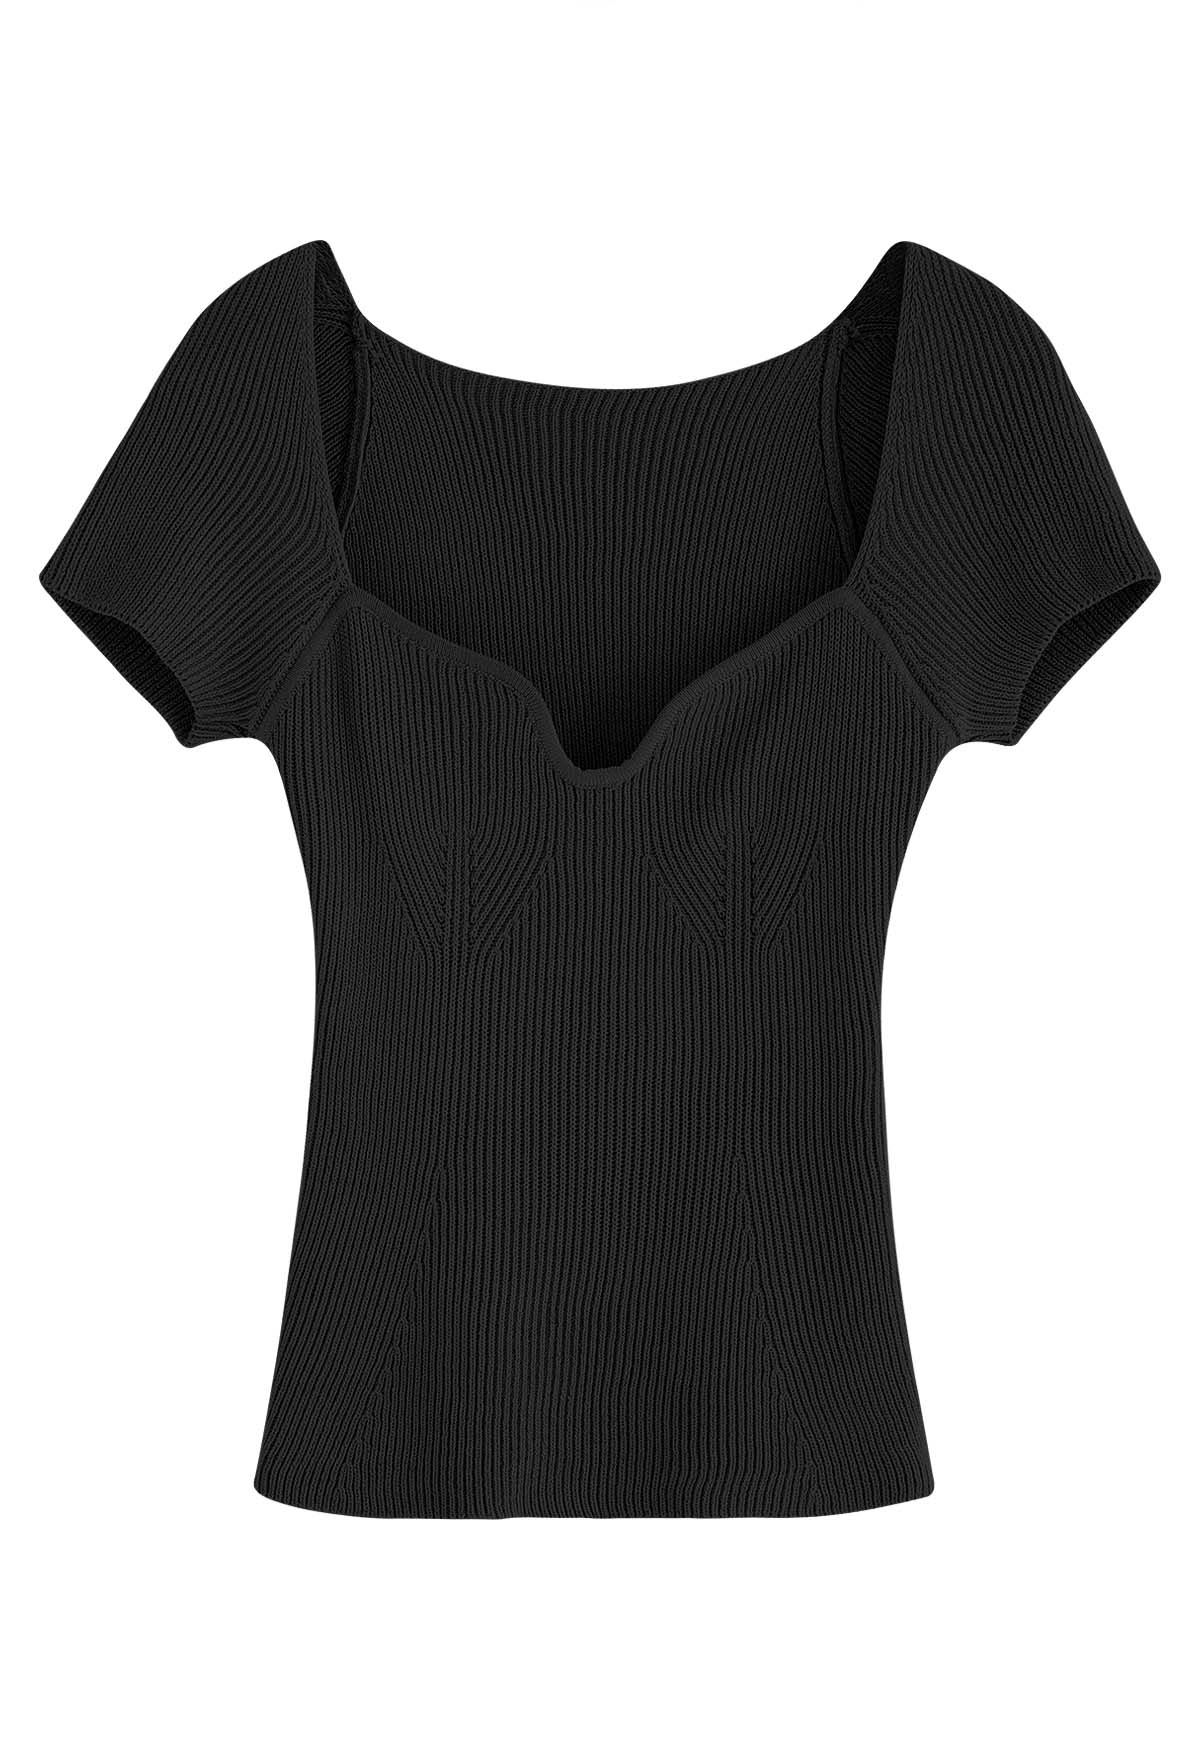 U-Shape Wide Collar Fitted Knit Top in Black - Retro, Indie and Unique ...